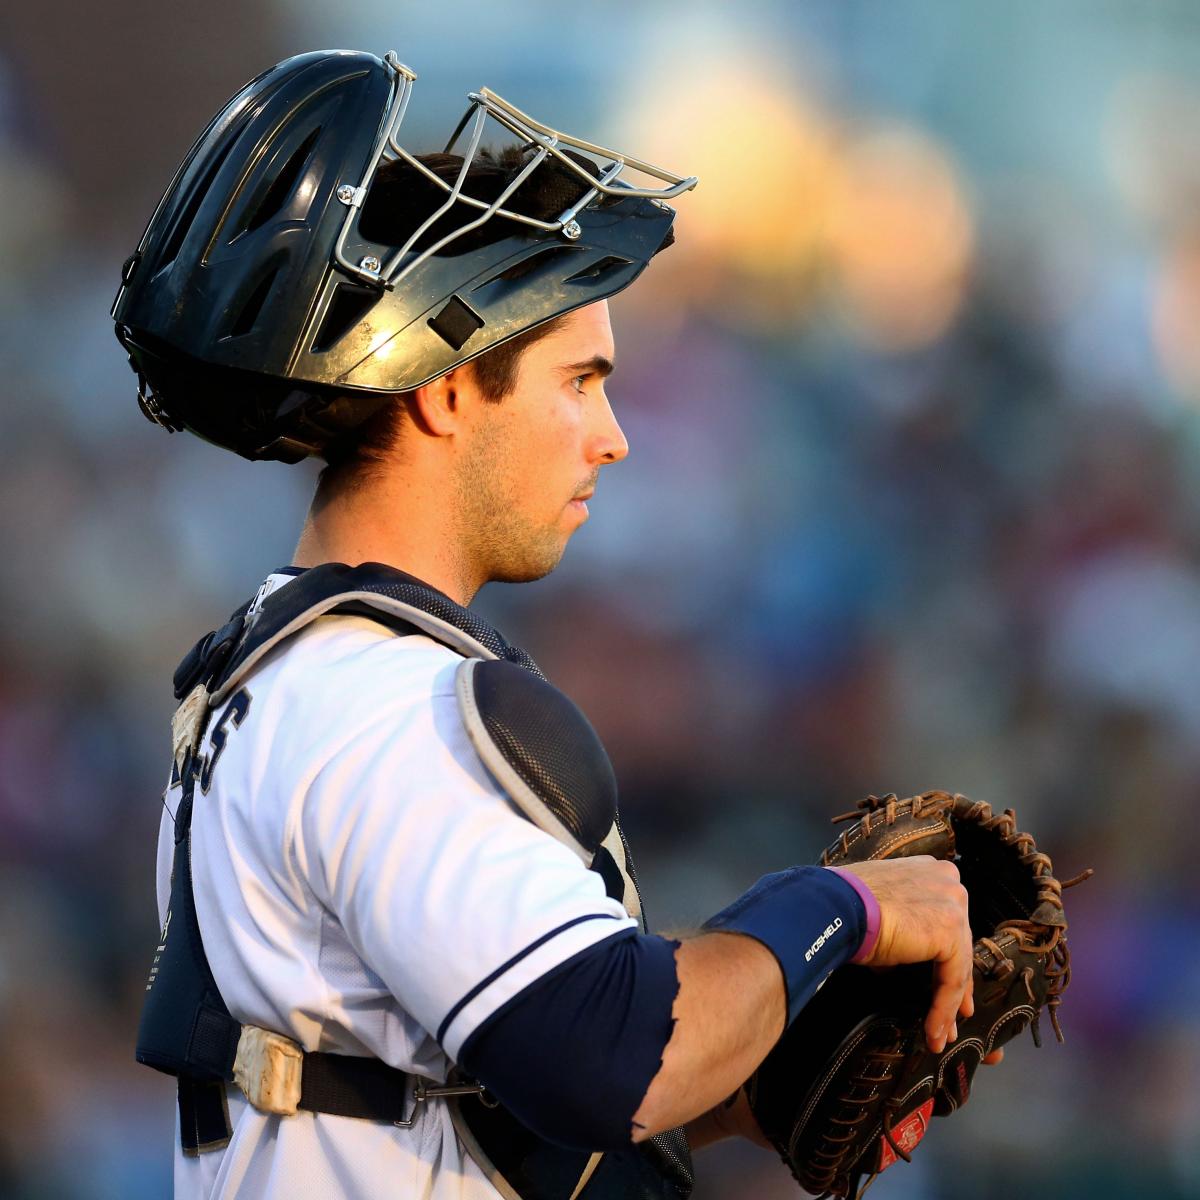 San Diego Padres: Third round of 2015 Draft reveals missed opportunity